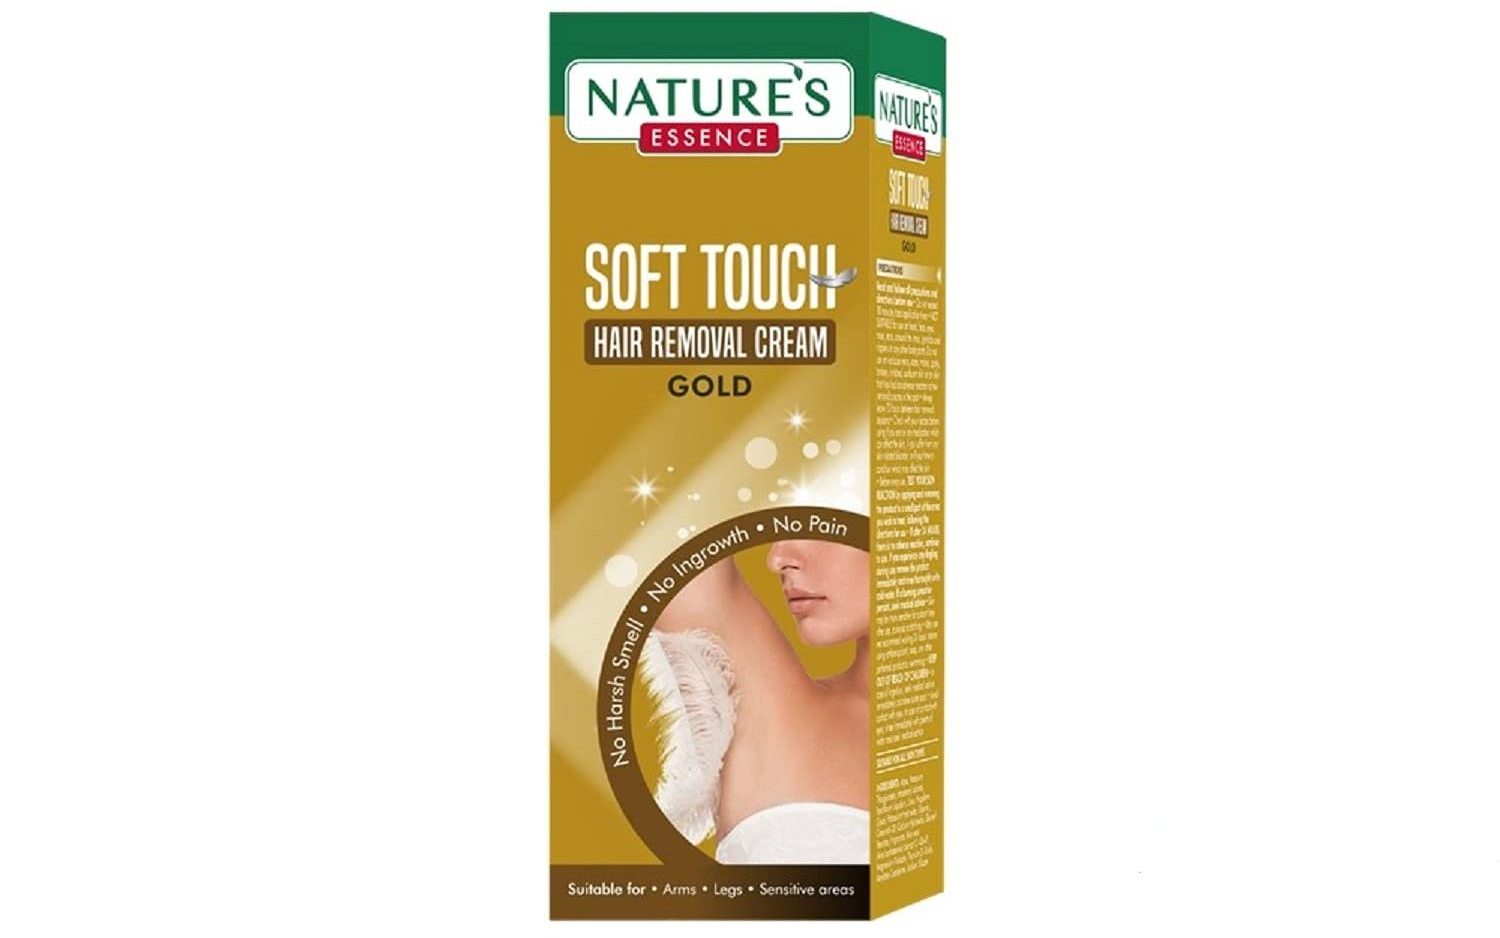 nature-essence-soft-touch-hair-removal-cream